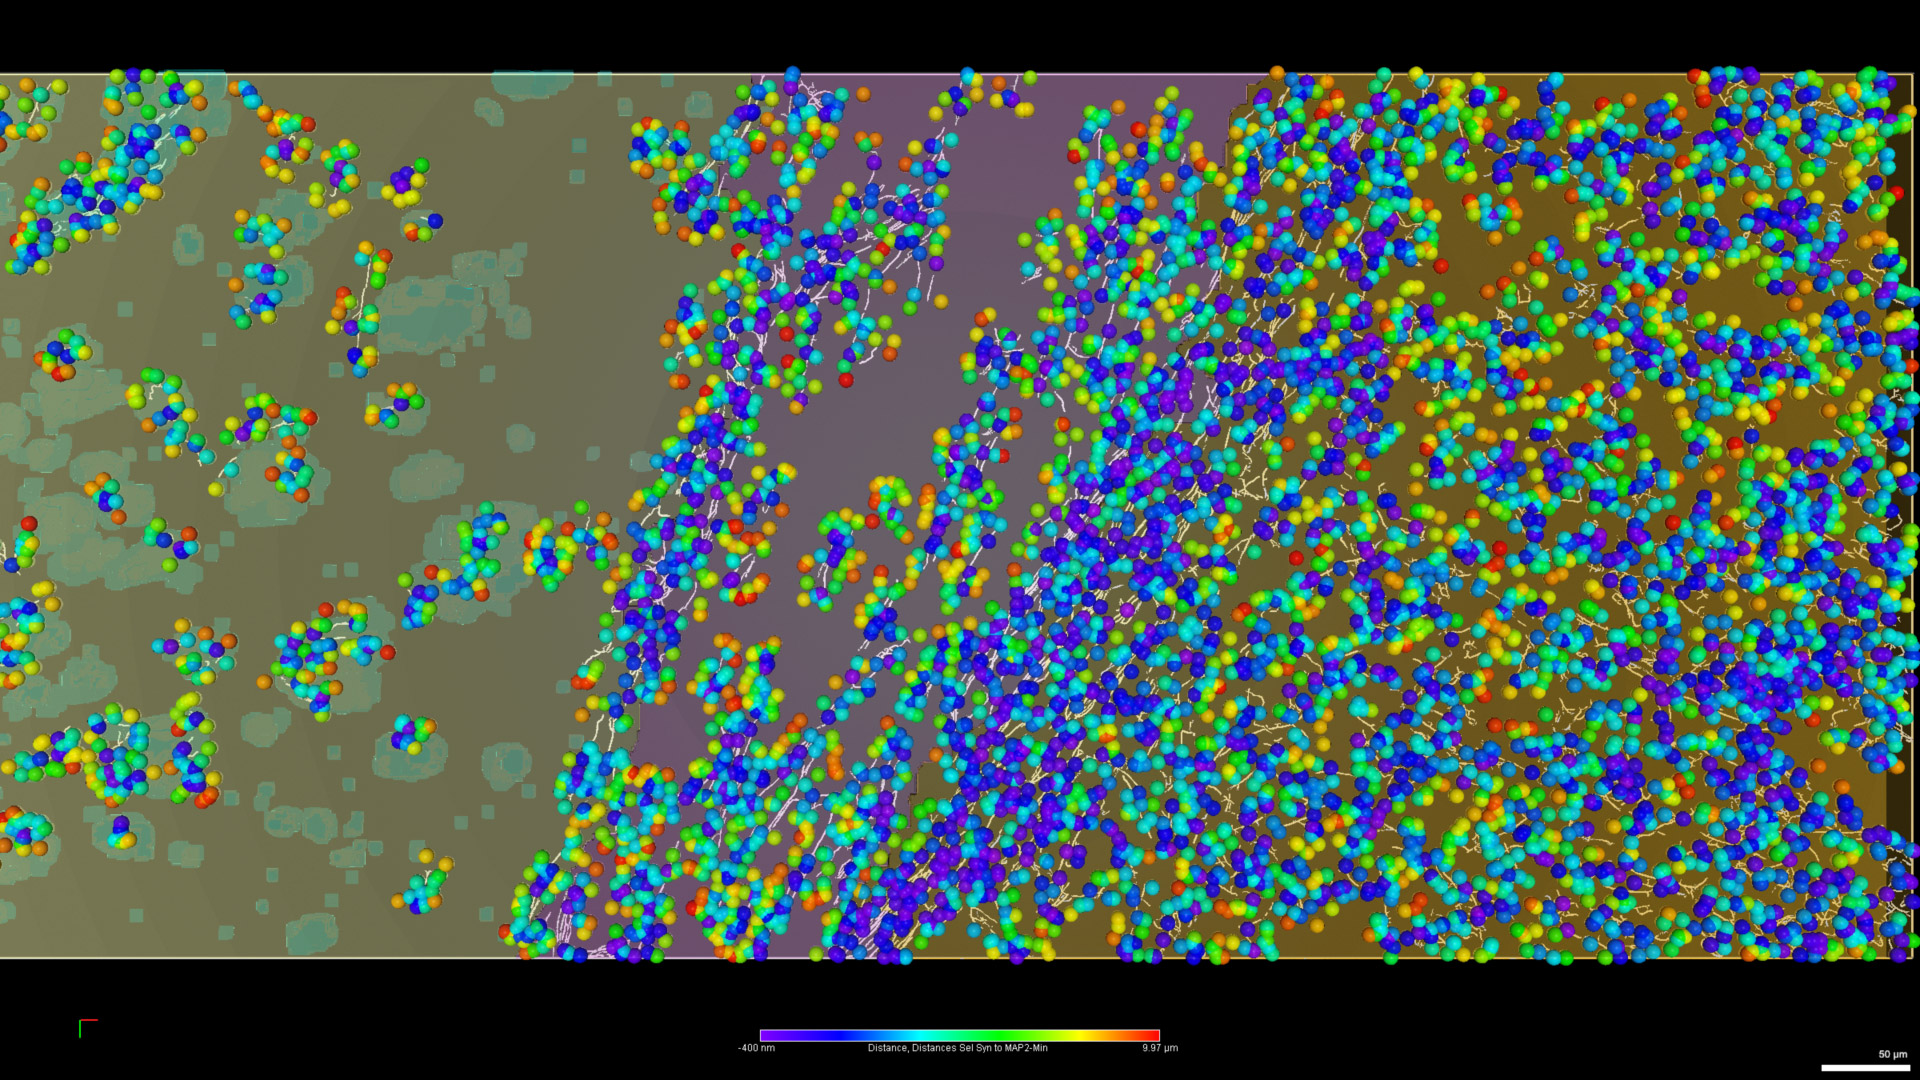 Figure 20: Synapsis proximity to MAP2. Visual representation of the subsetted synapses, color-coded by their distance to the nearest MAP2 filament. Objects with a distance over 200 μm were removed